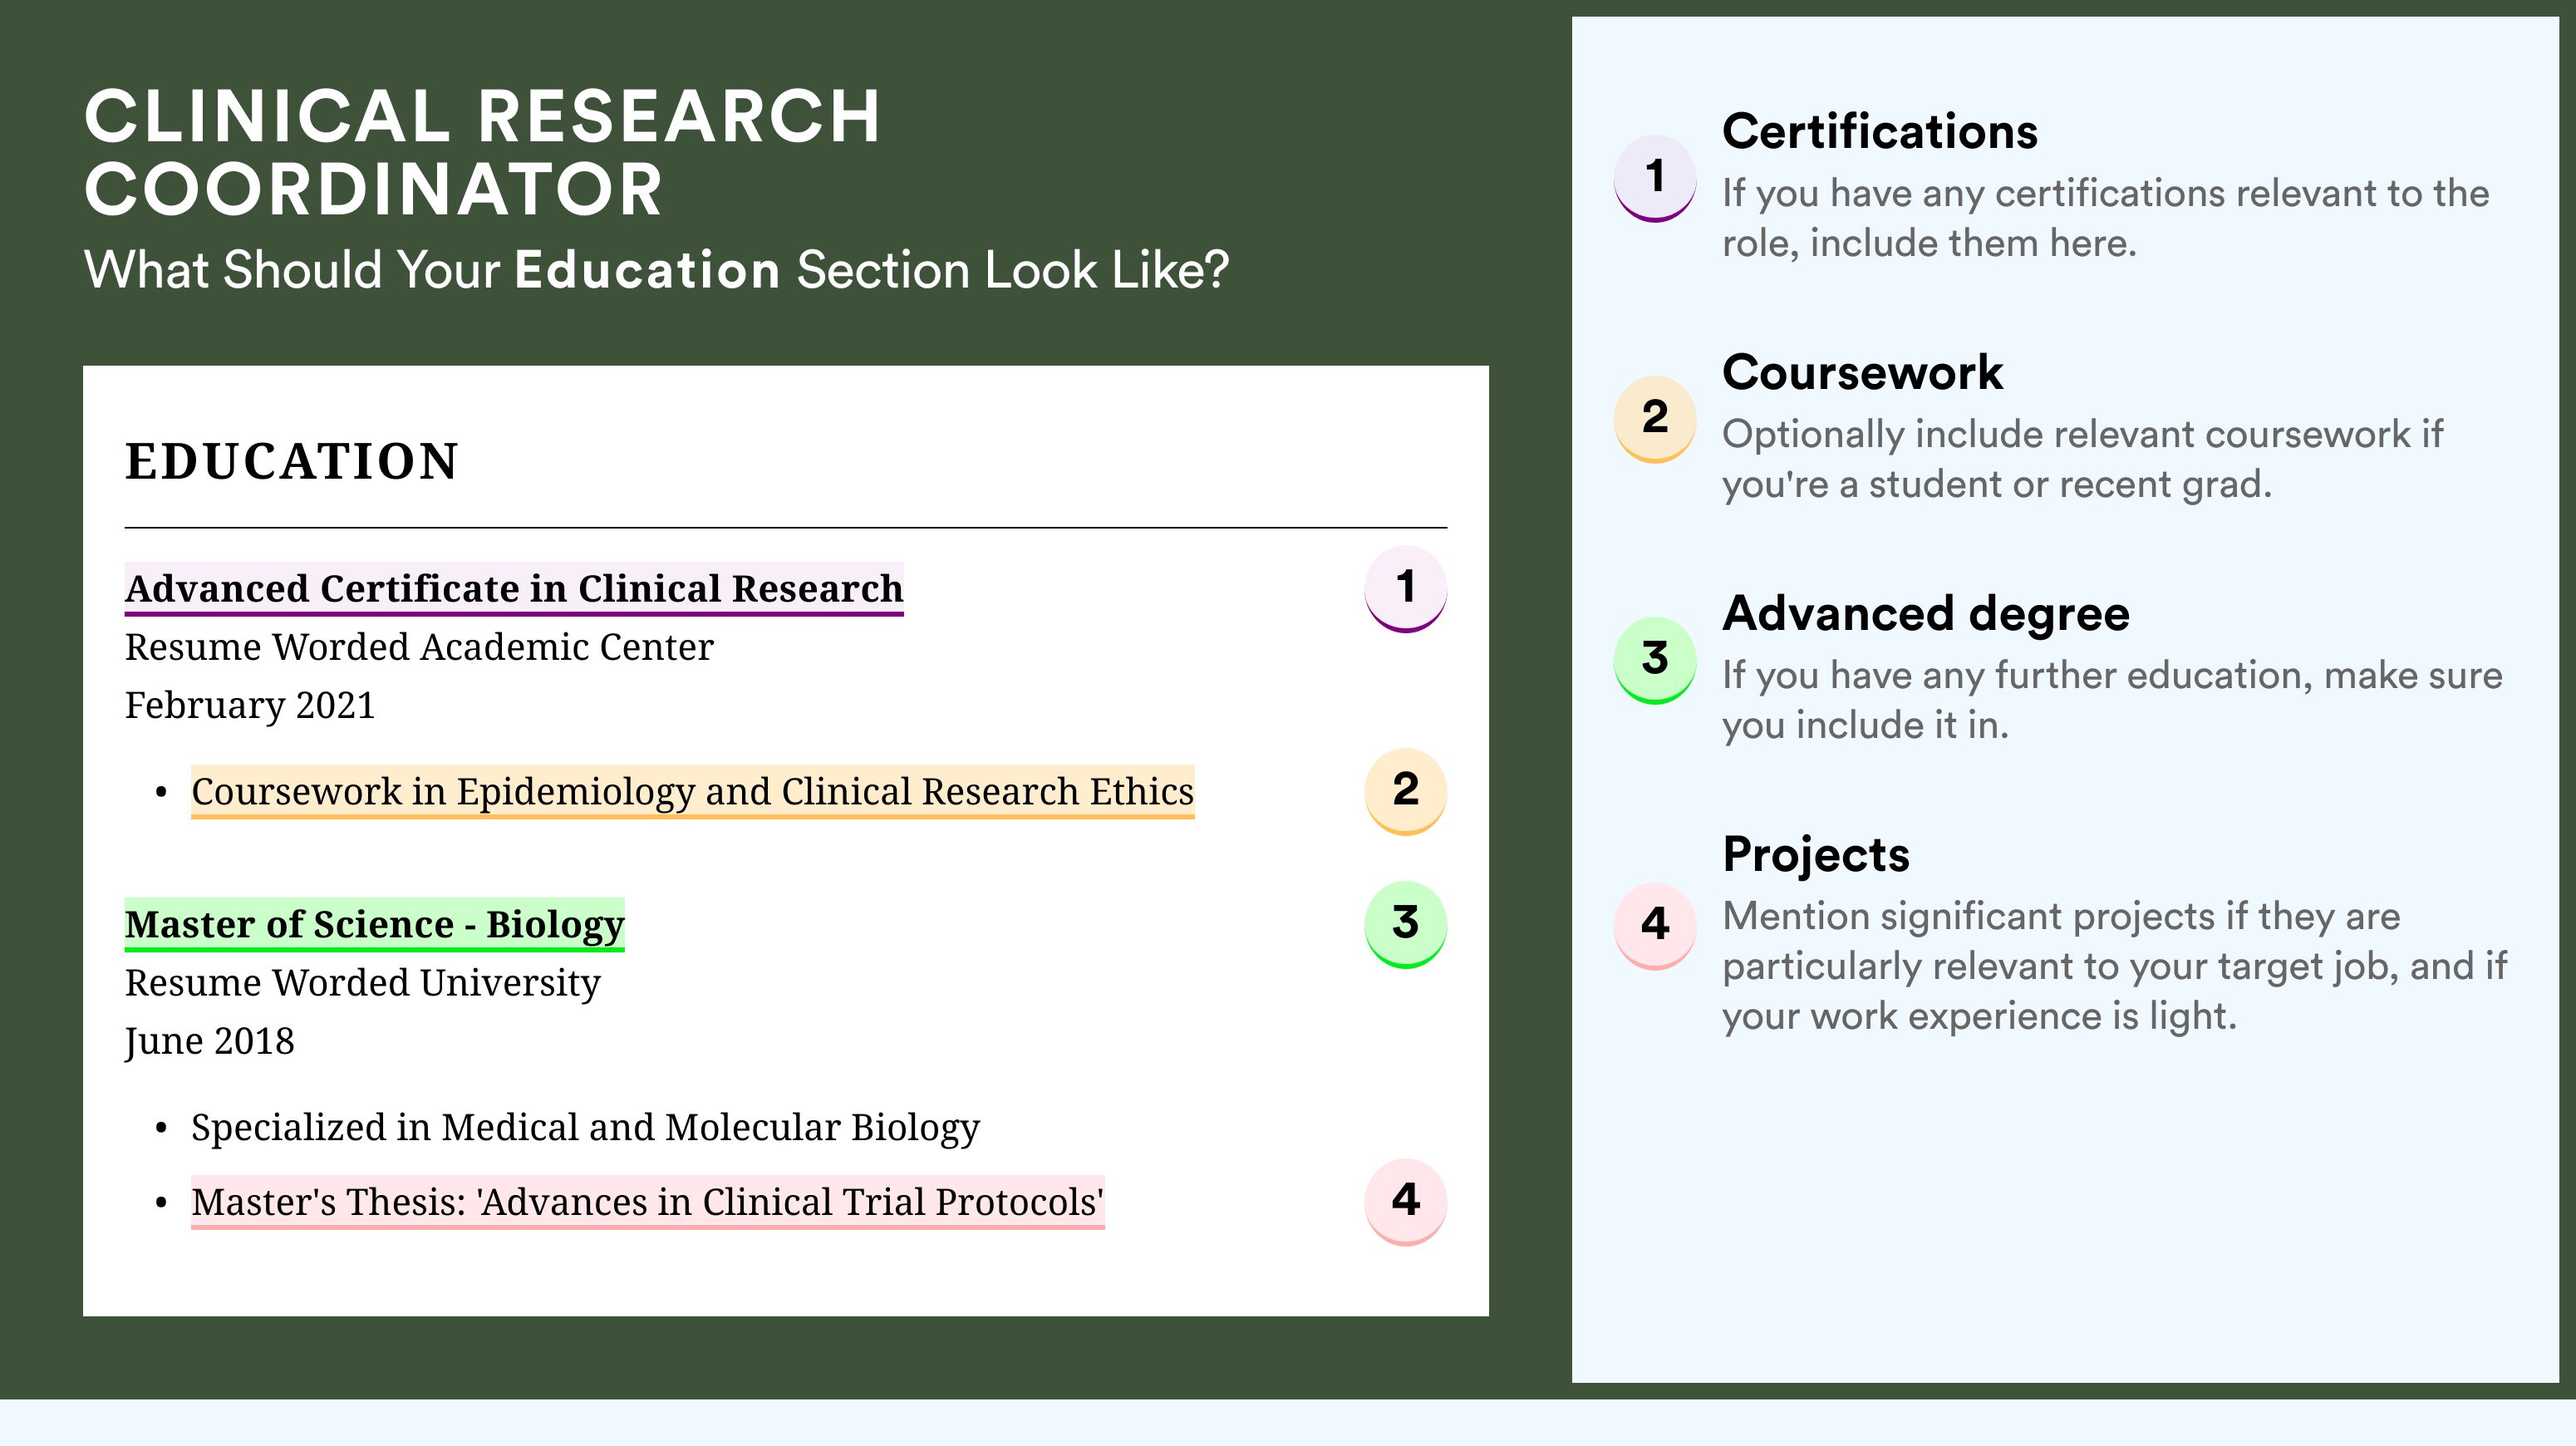 How To Write An Education Section - Clinical Research Coordinator Roles